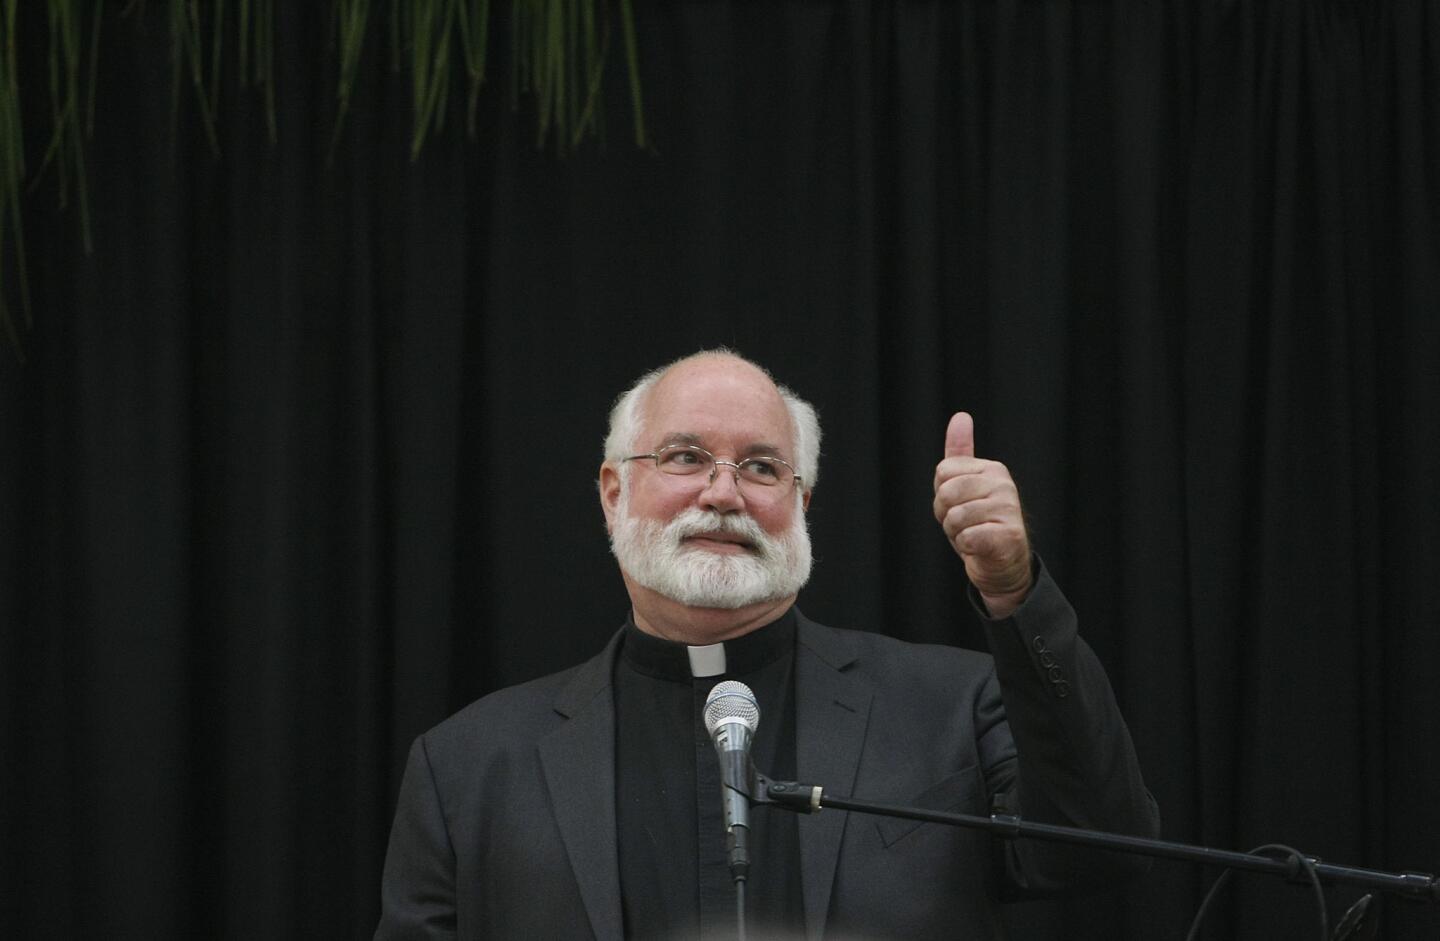 Father Greg Boyle, giving the thumbs up, was the keynote speaker at the annual YMCA of the Foothills Community Prayer Breakfast in La Canada Flintridge on Thursday, Nov. 7, 2013. Father Boyle is the founder of Homeboy Industries.